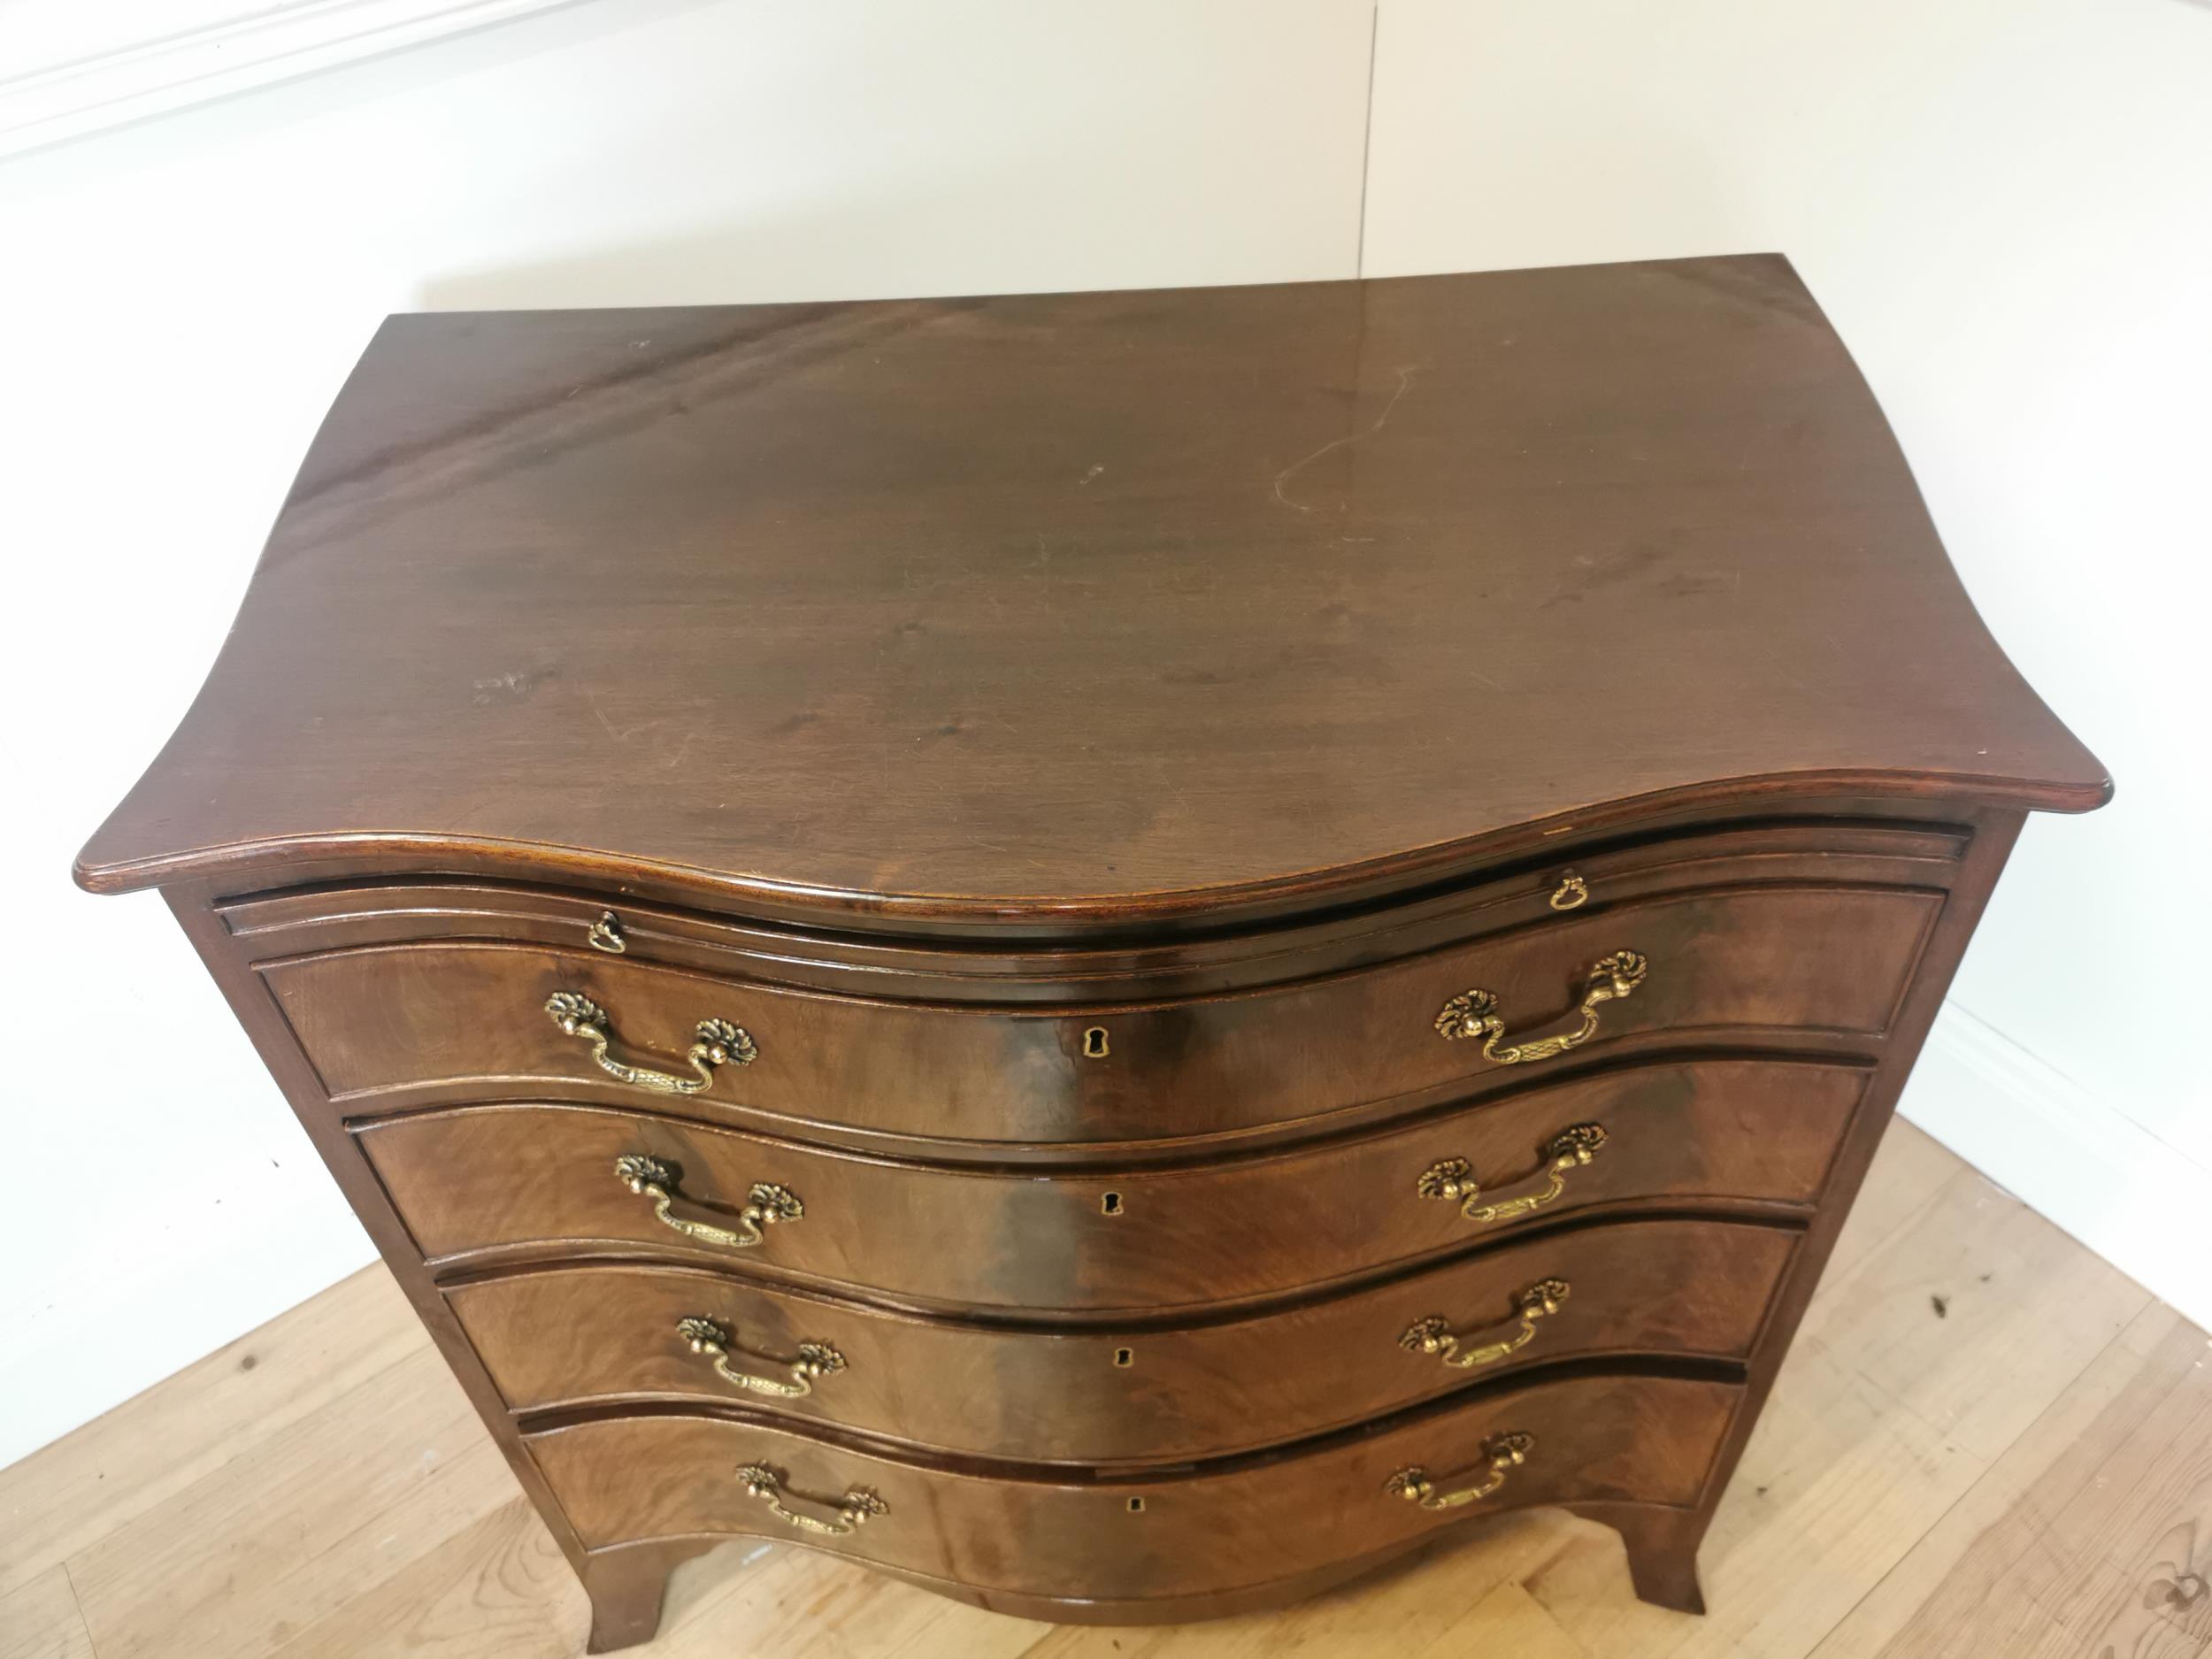 Good quality Edwardian serpentine fronted chest of drawers with four graduated drawers with brushing - Image 5 of 6